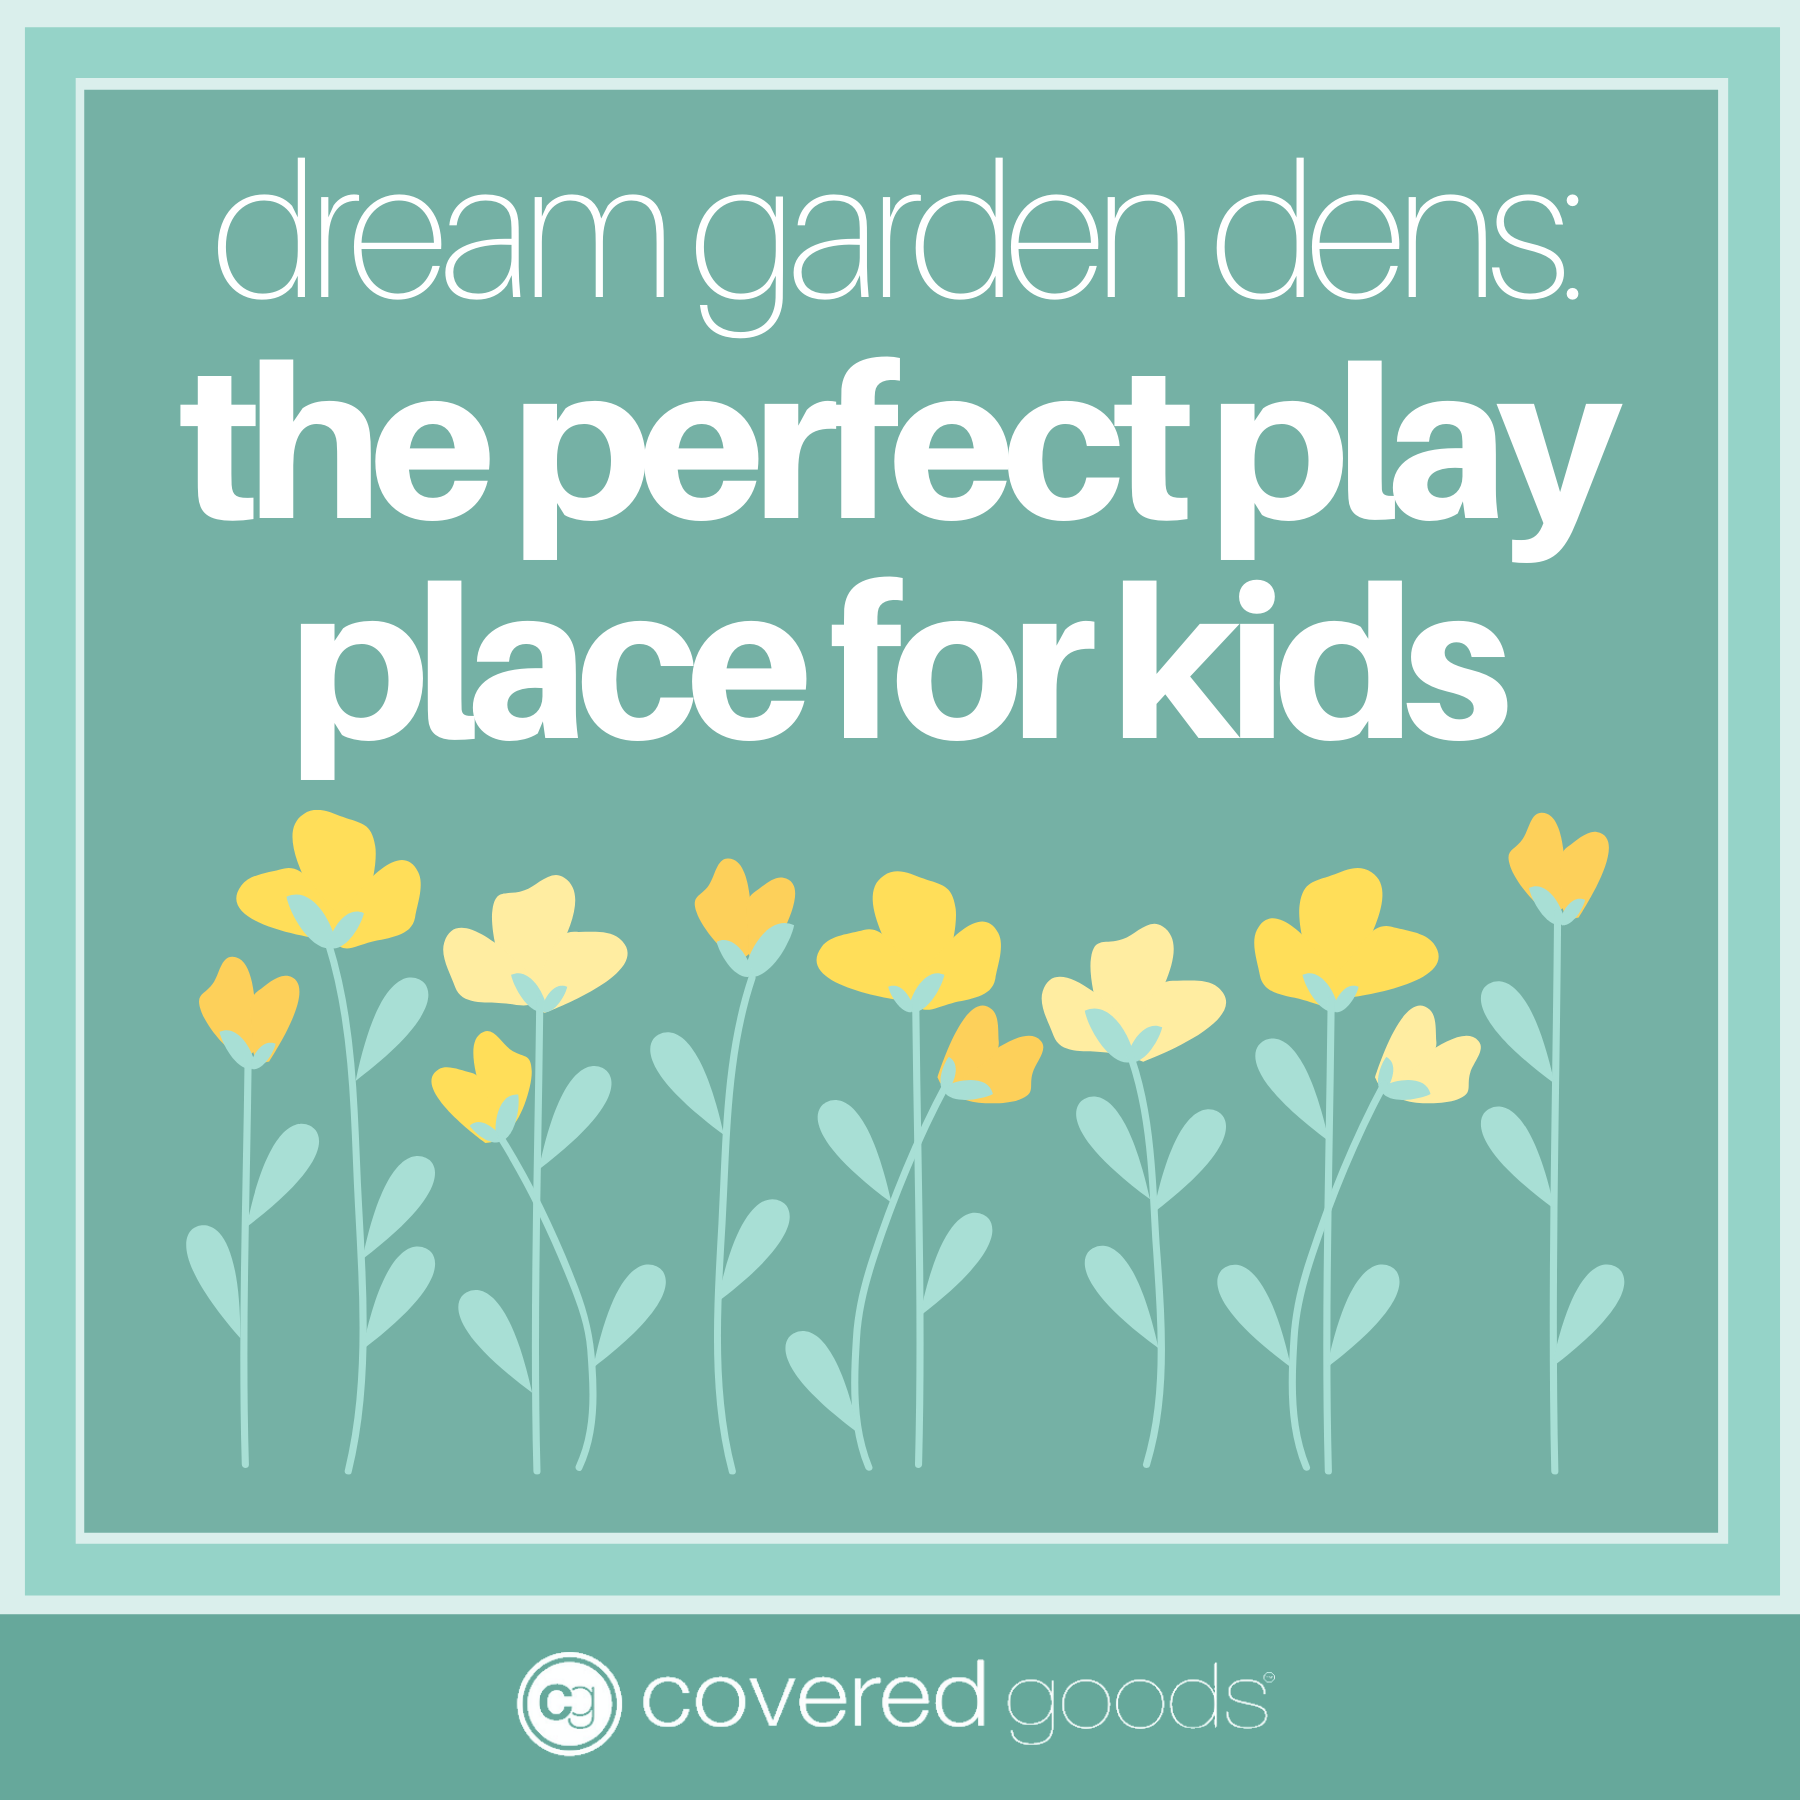 Dream Garden Dens: The Perfect Play Place for Kids